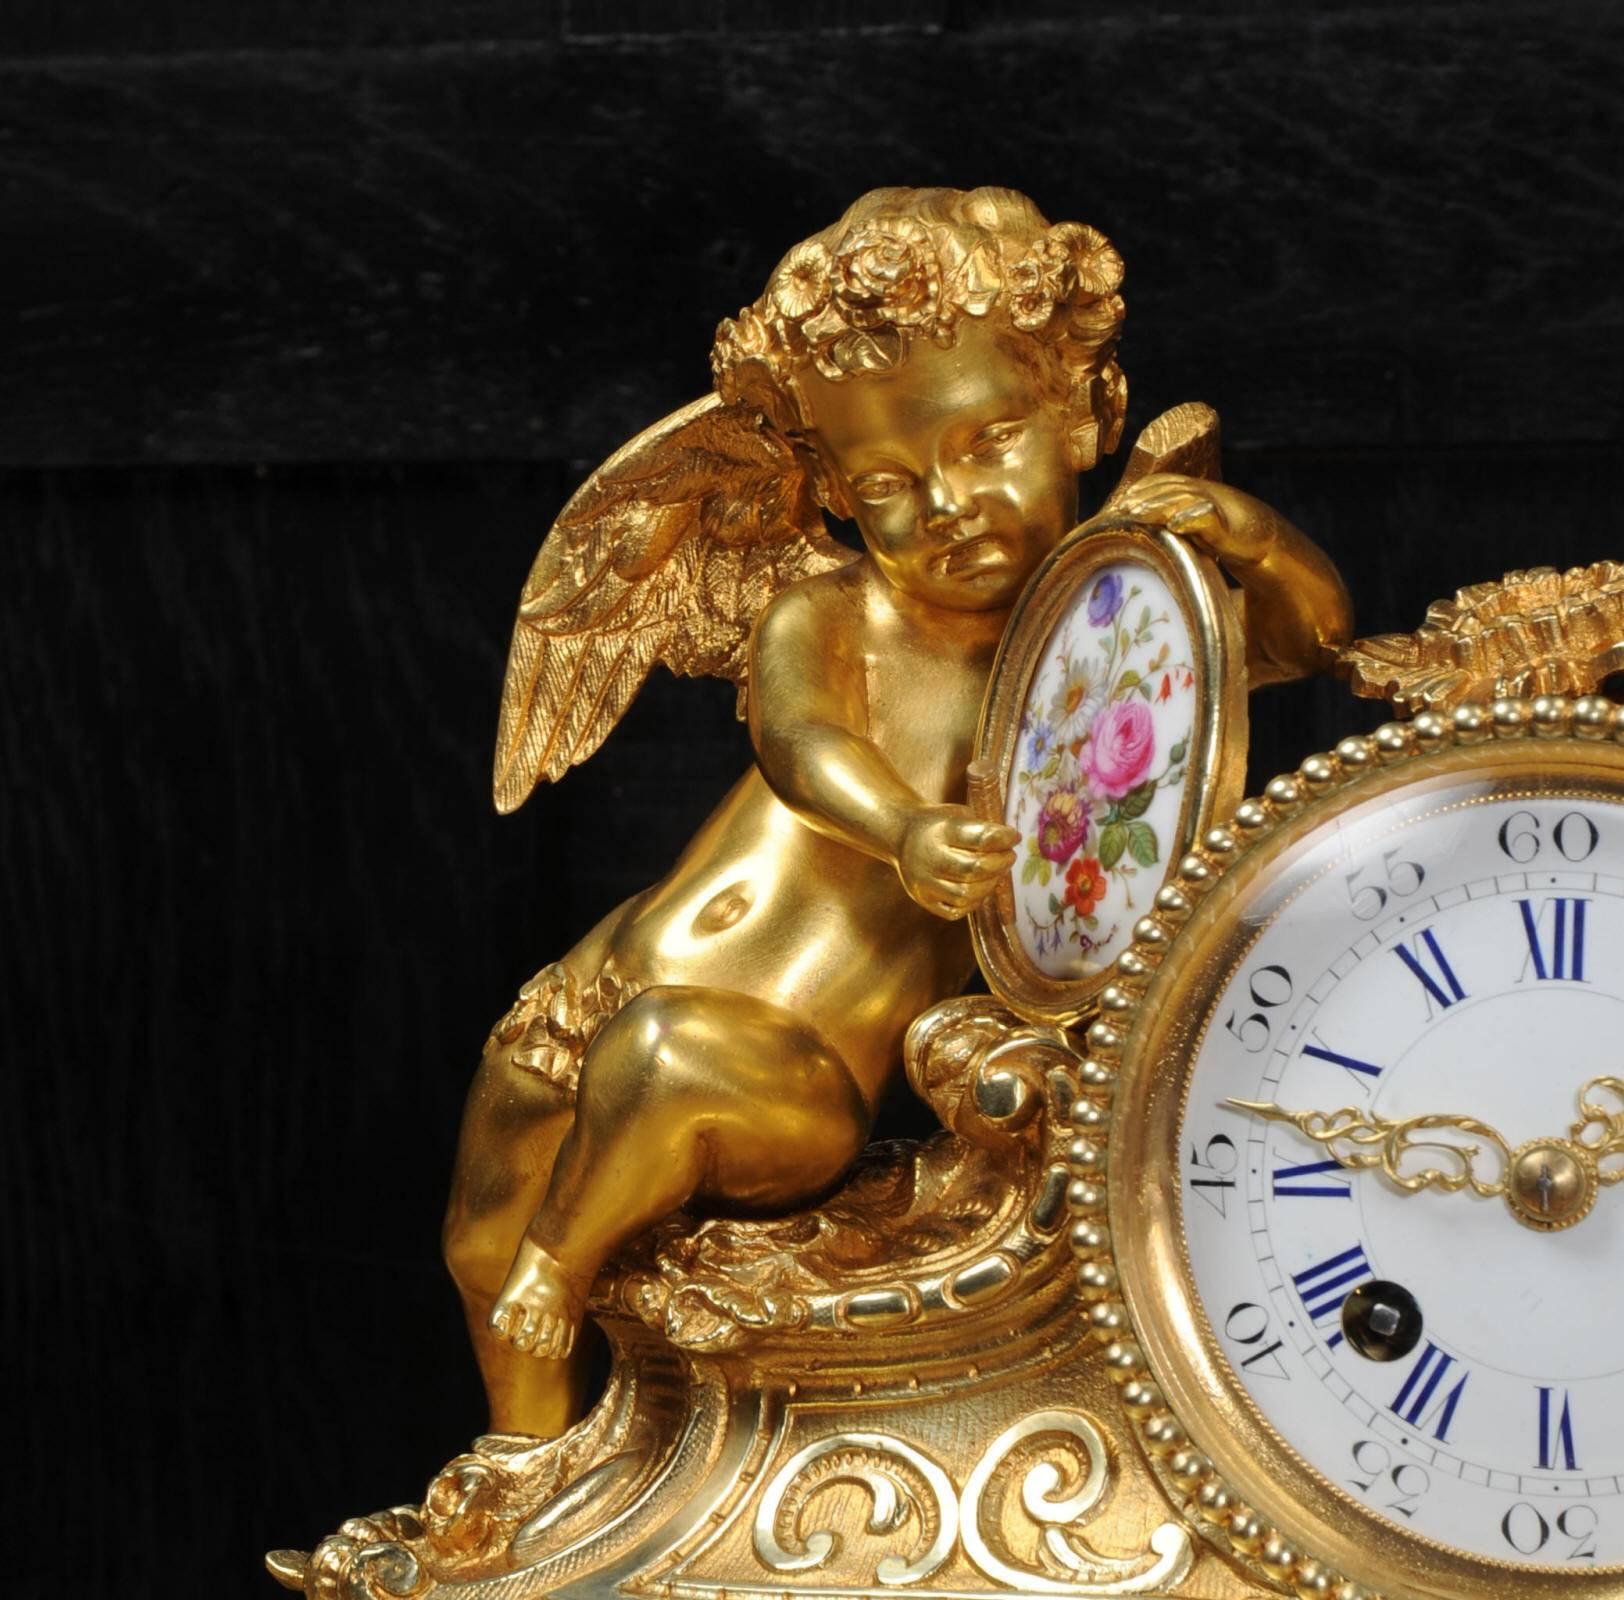 A fine and early clock set by the famous maker Japy Freres, in full working order. It is of superb quality in fine gilded bronze-mounted with delicately painted Sèrves style porcelain. It features a putto painting a panel of finely painted flowers.